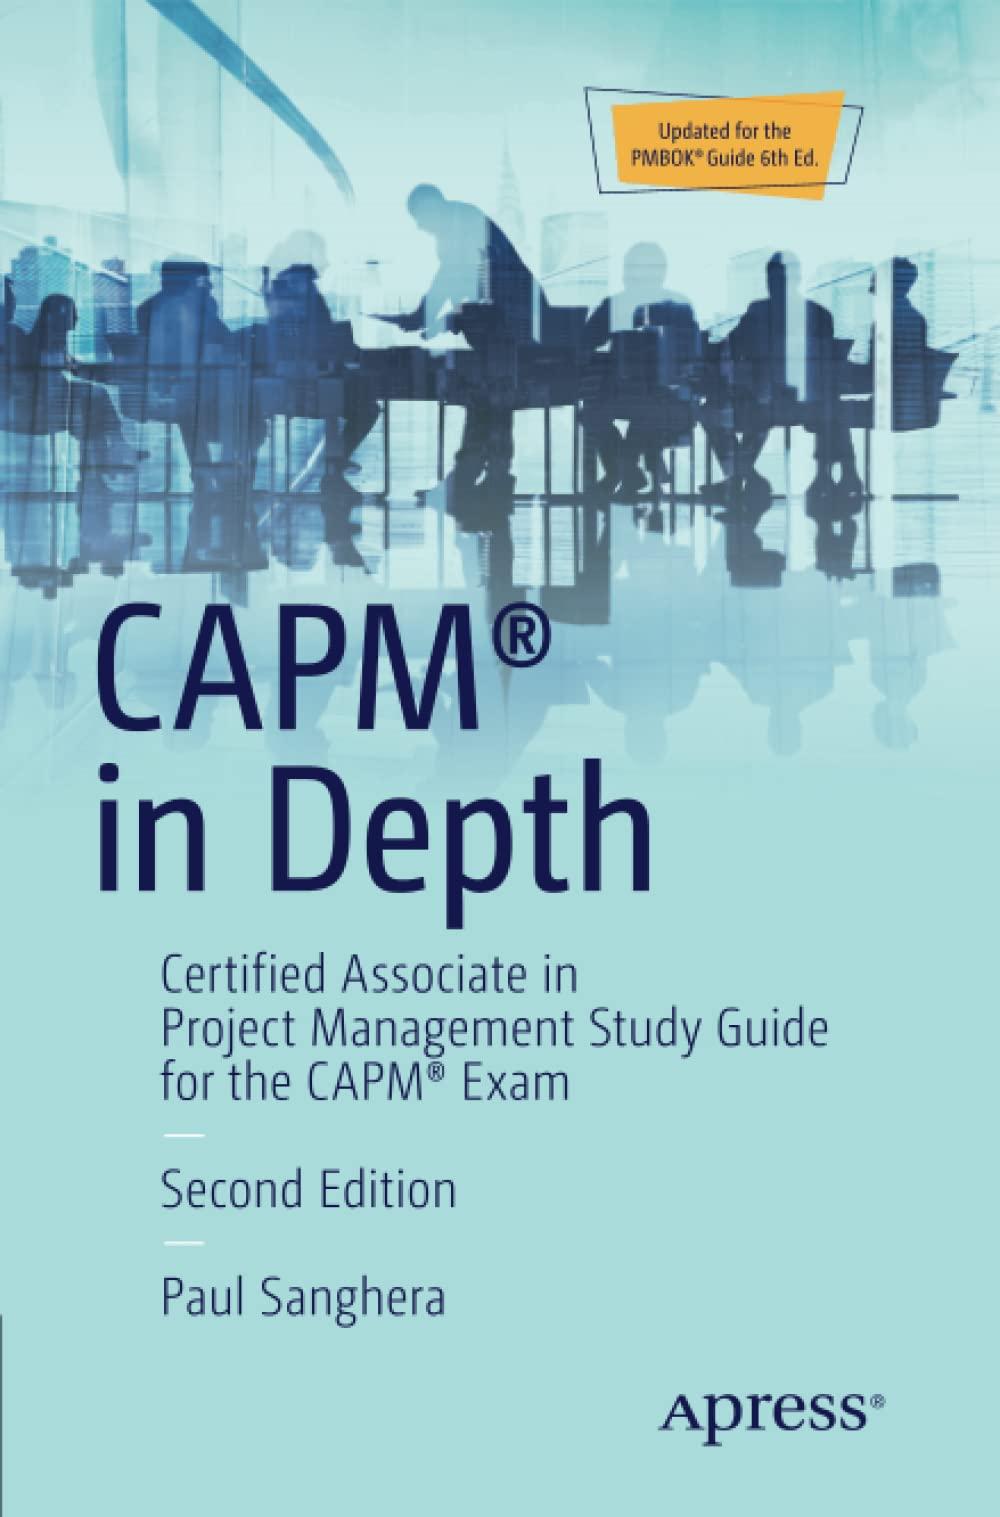 capm in depth certified associate in project management study guide for the capm exam 2nd edition paul